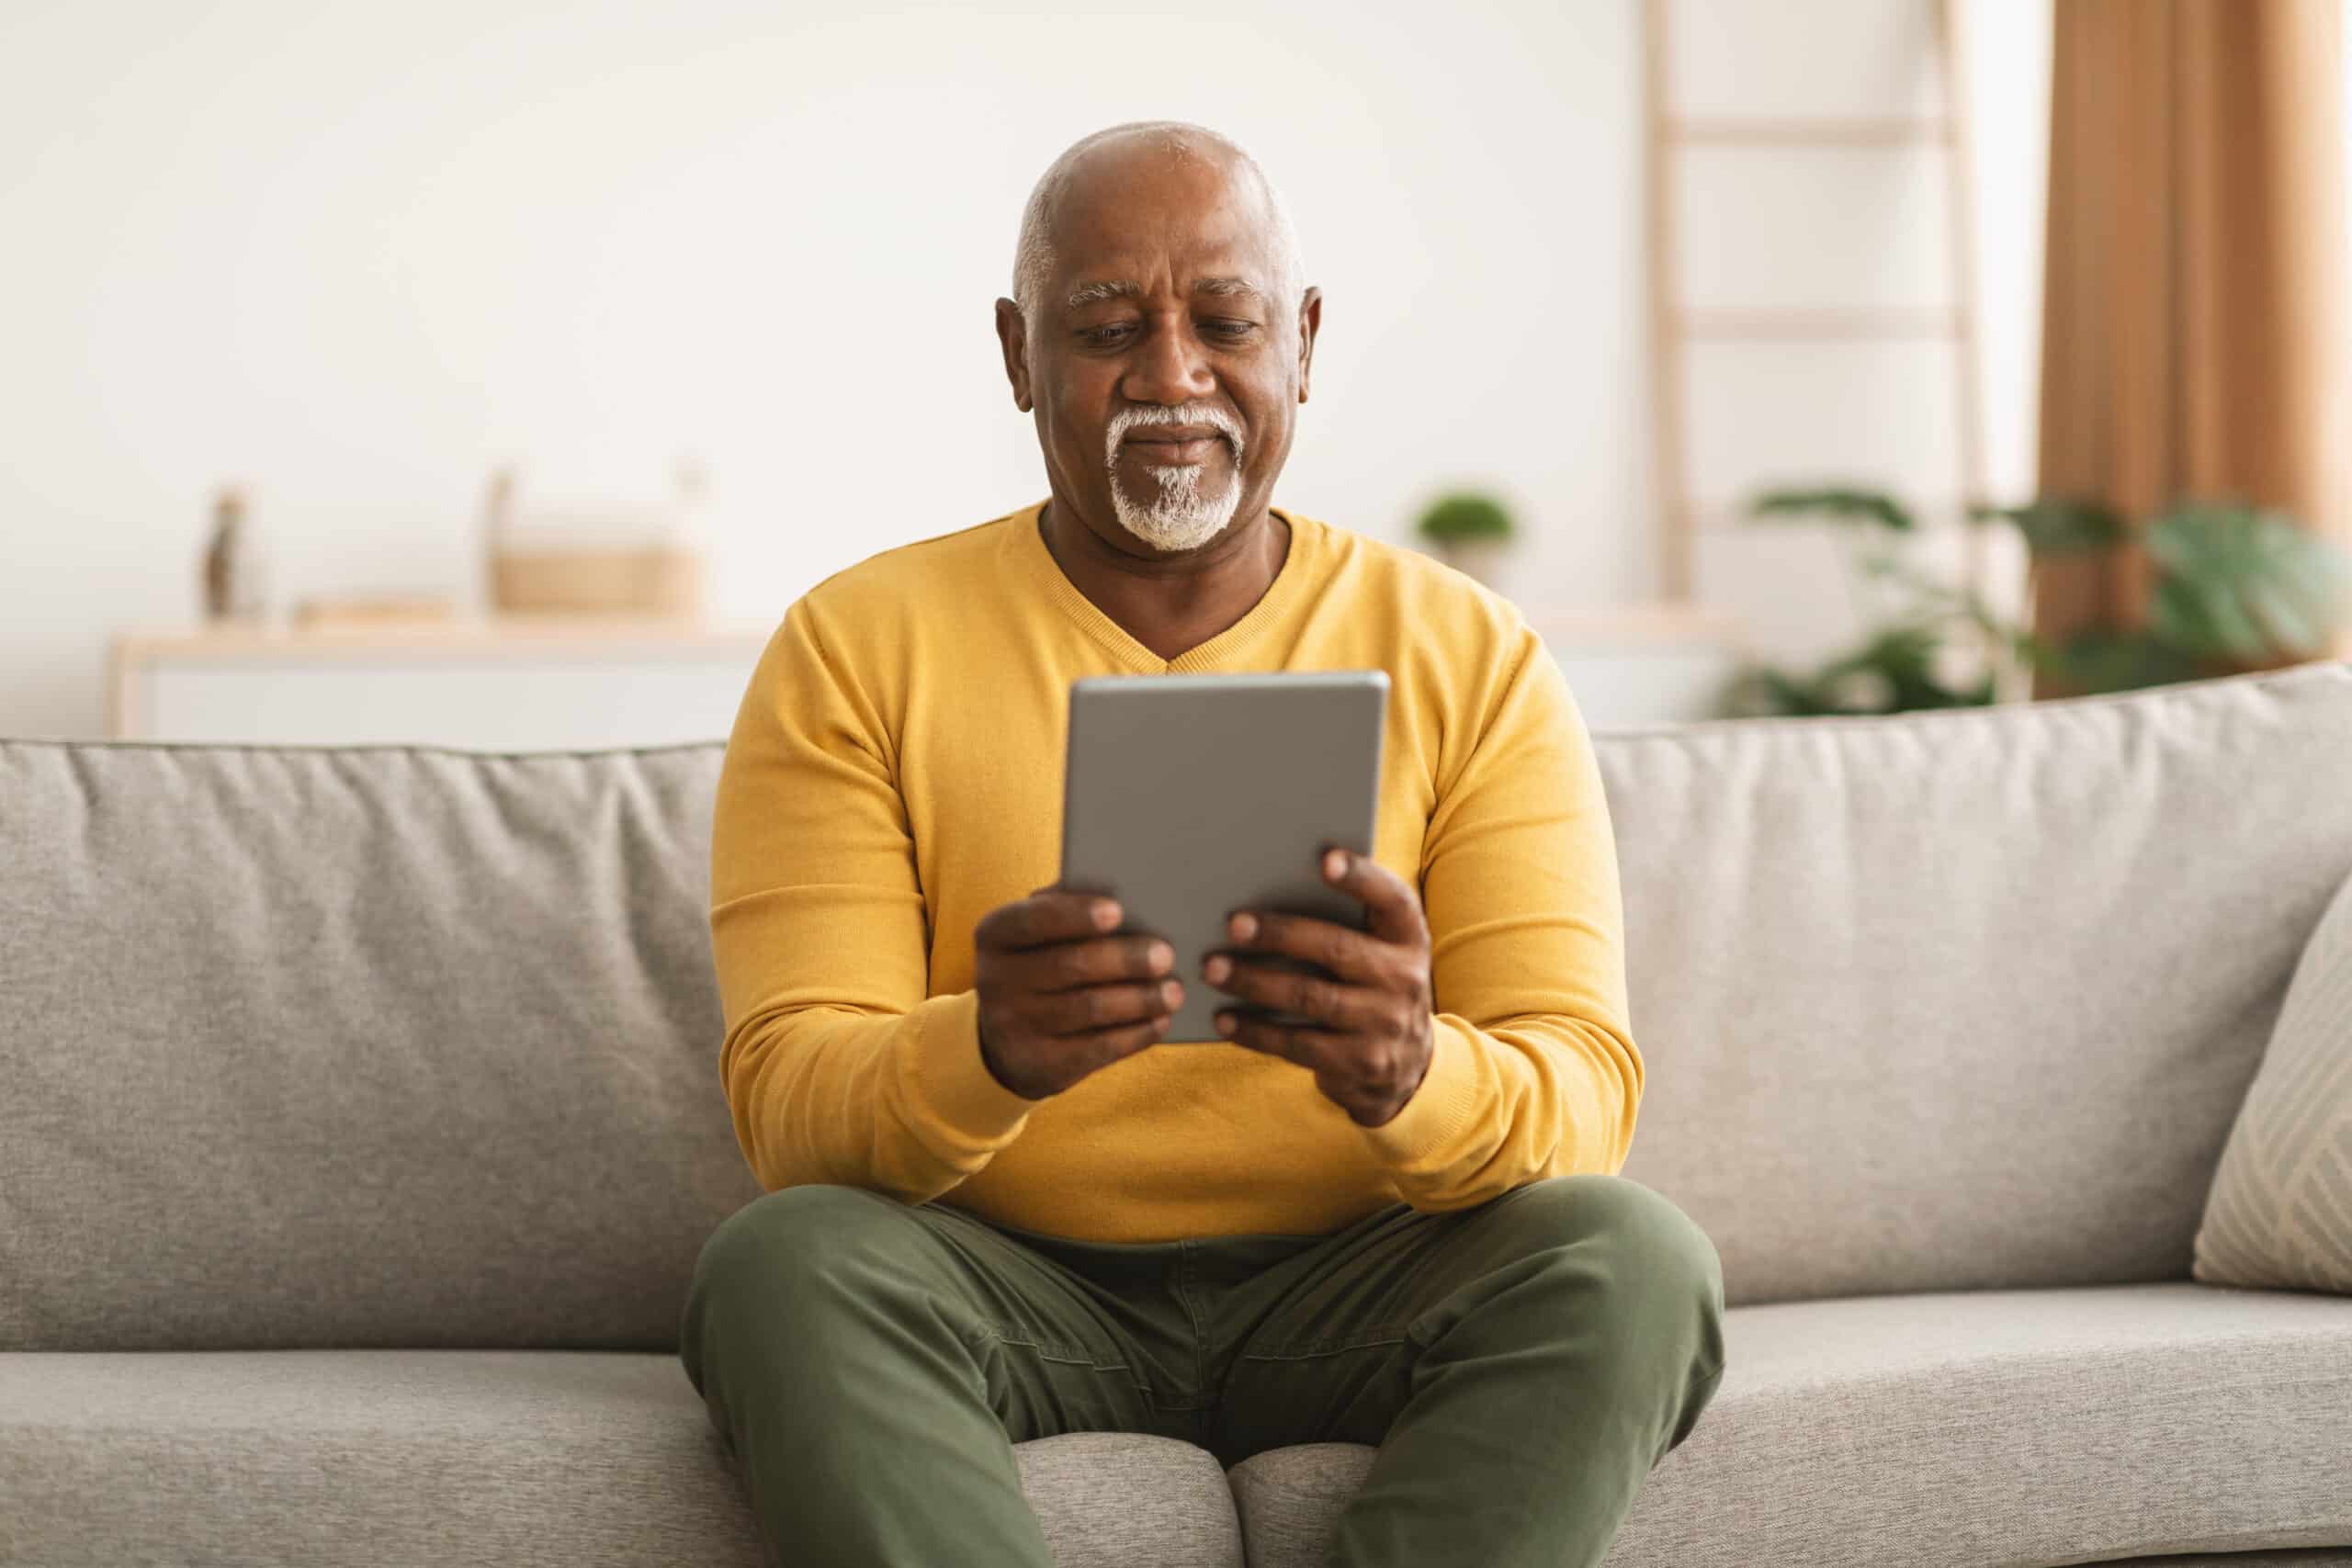 Senior African American Male Using Digital Tablet Reading Online Book And Browsing Internet Sitting On Sofa At Home. Mature Man Holding Computer Relaxing In Living Room. Older People And Gadgets